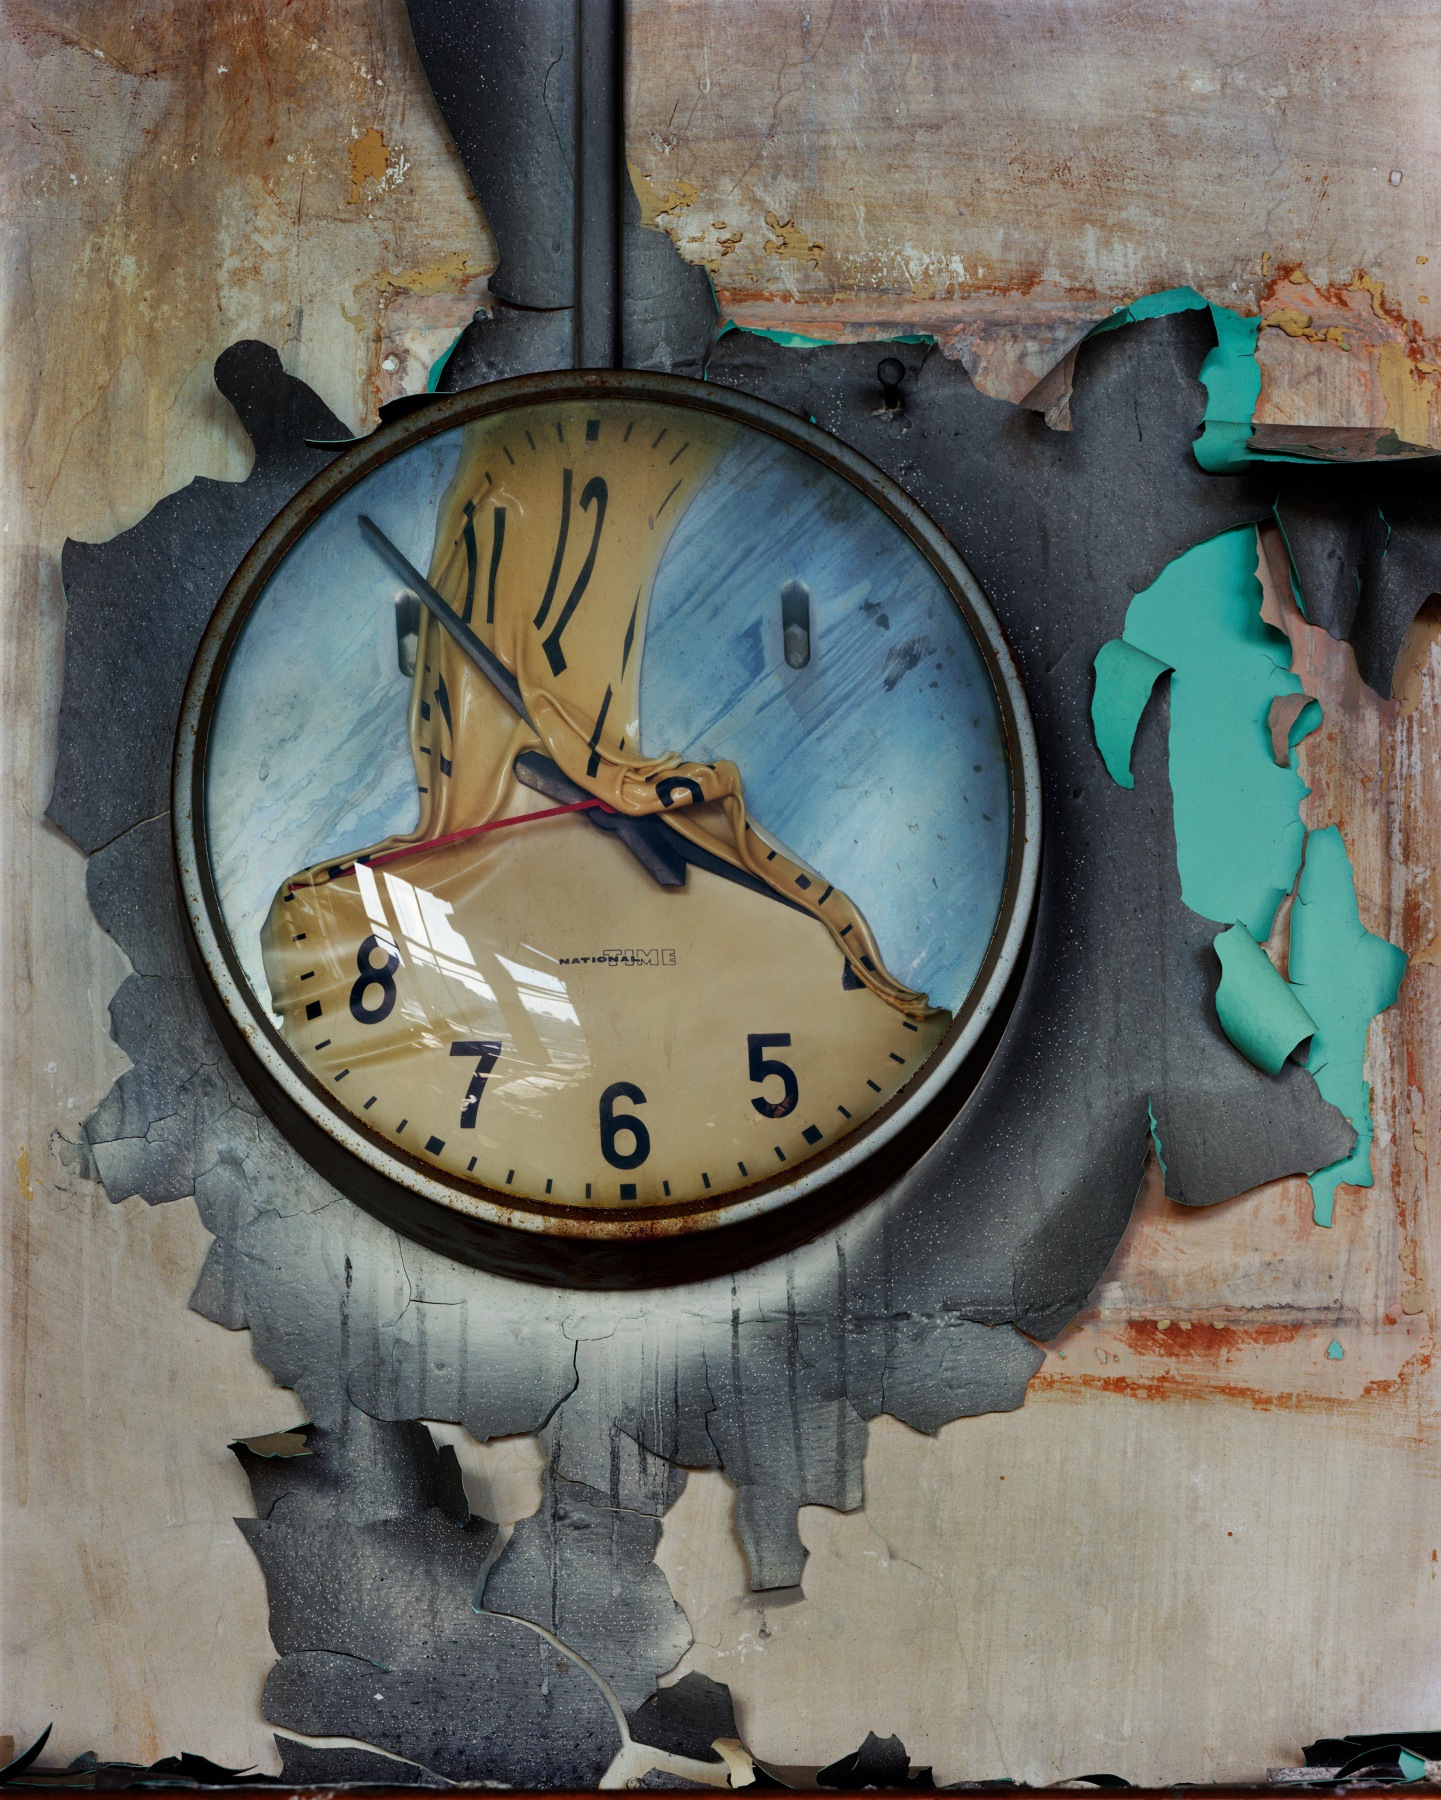 National Time, from the series Detroit, 2008. Archival pigment&nbsp;print. Available at 40 x 30, 50 x 40, 60 x 50, or 90 x 70 inches, edition of 5.